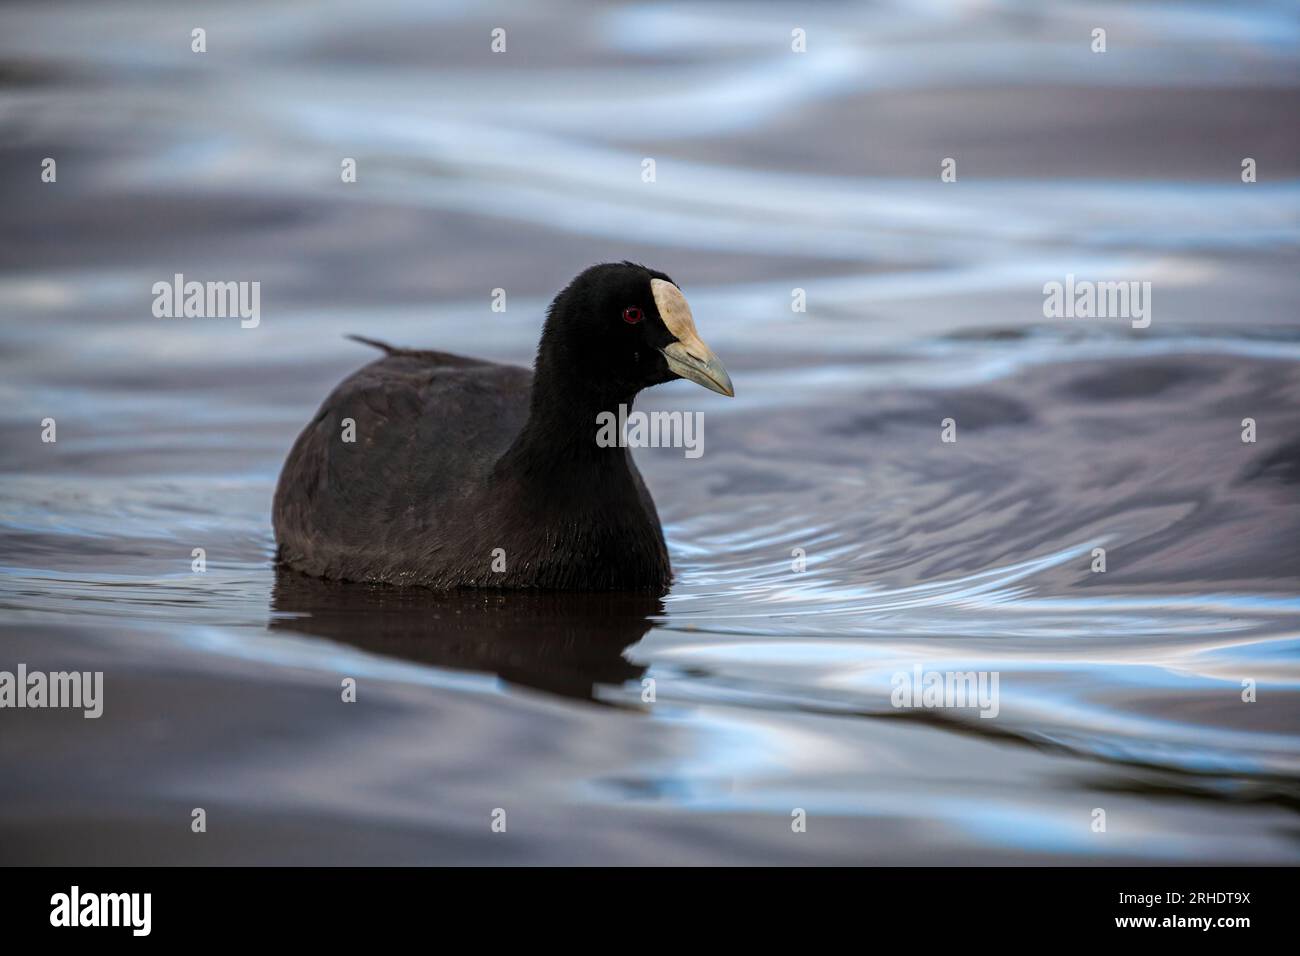 An Australian coot - Fulica atra - swimming on the water Stock Photo